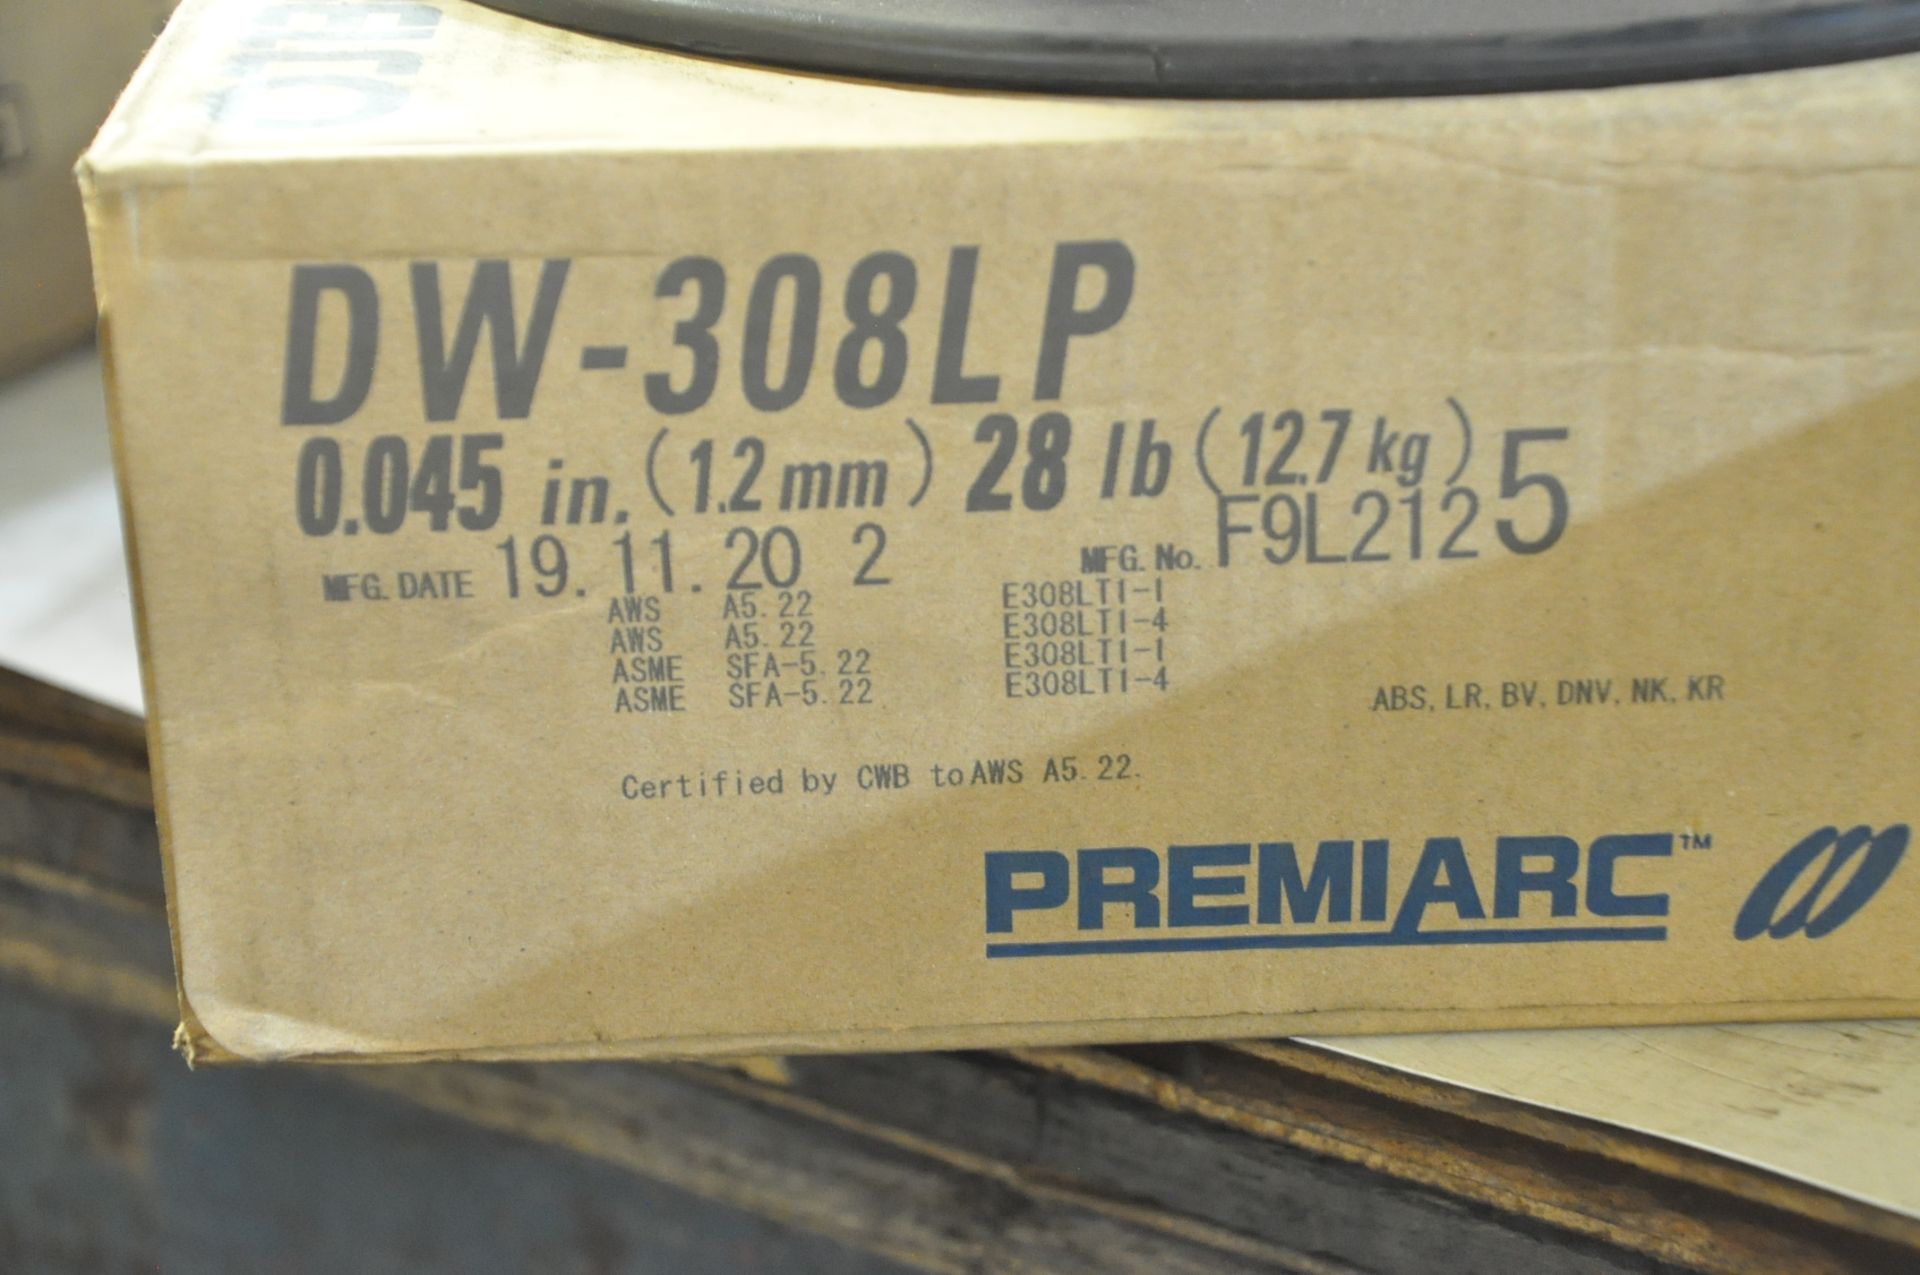 Lot-PREMIARC DW-308LP .045" Stainless Steel Tubular Welding Wire Spool in (1) Box, Etc. - Image 3 of 3